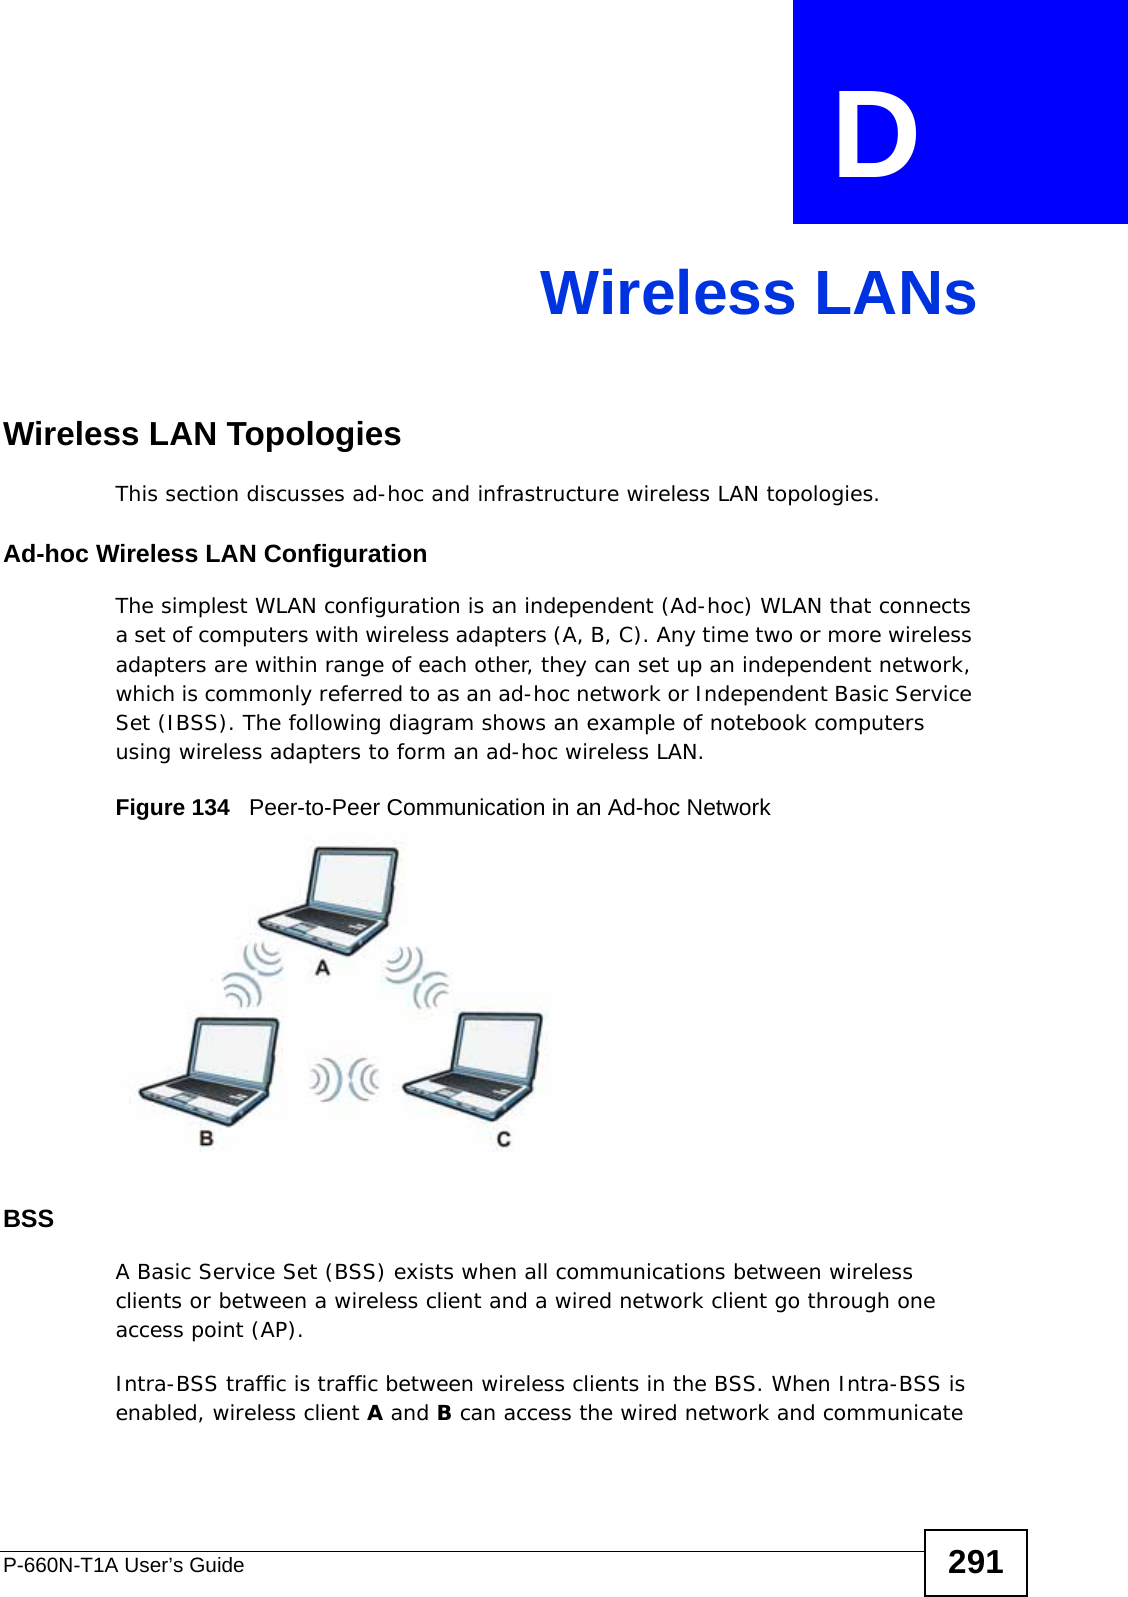 P-660N-T1A User’s Guide 291APPENDIX  D Wireless LANsWireless LAN TopologiesThis section discusses ad-hoc and infrastructure wireless LAN topologies.Ad-hoc Wireless LAN ConfigurationThe simplest WLAN configuration is an independent (Ad-hoc) WLAN that connects a set of computers with wireless adapters (A, B, C). Any time two or more wireless adapters are within range of each other, they can set up an independent network, which is commonly referred to as an ad-hoc network or Independent Basic Service Set (IBSS). The following diagram shows an example of notebook computers using wireless adapters to form an ad-hoc wireless LAN. Figure 134   Peer-to-Peer Communication in an Ad-hoc NetworkBSSA Basic Service Set (BSS) exists when all communications between wireless clients or between a wireless client and a wired network client go through one access point (AP). Intra-BSS traffic is traffic between wireless clients in the BSS. When Intra-BSS is enabled, wireless client A and B can access the wired network and communicate 